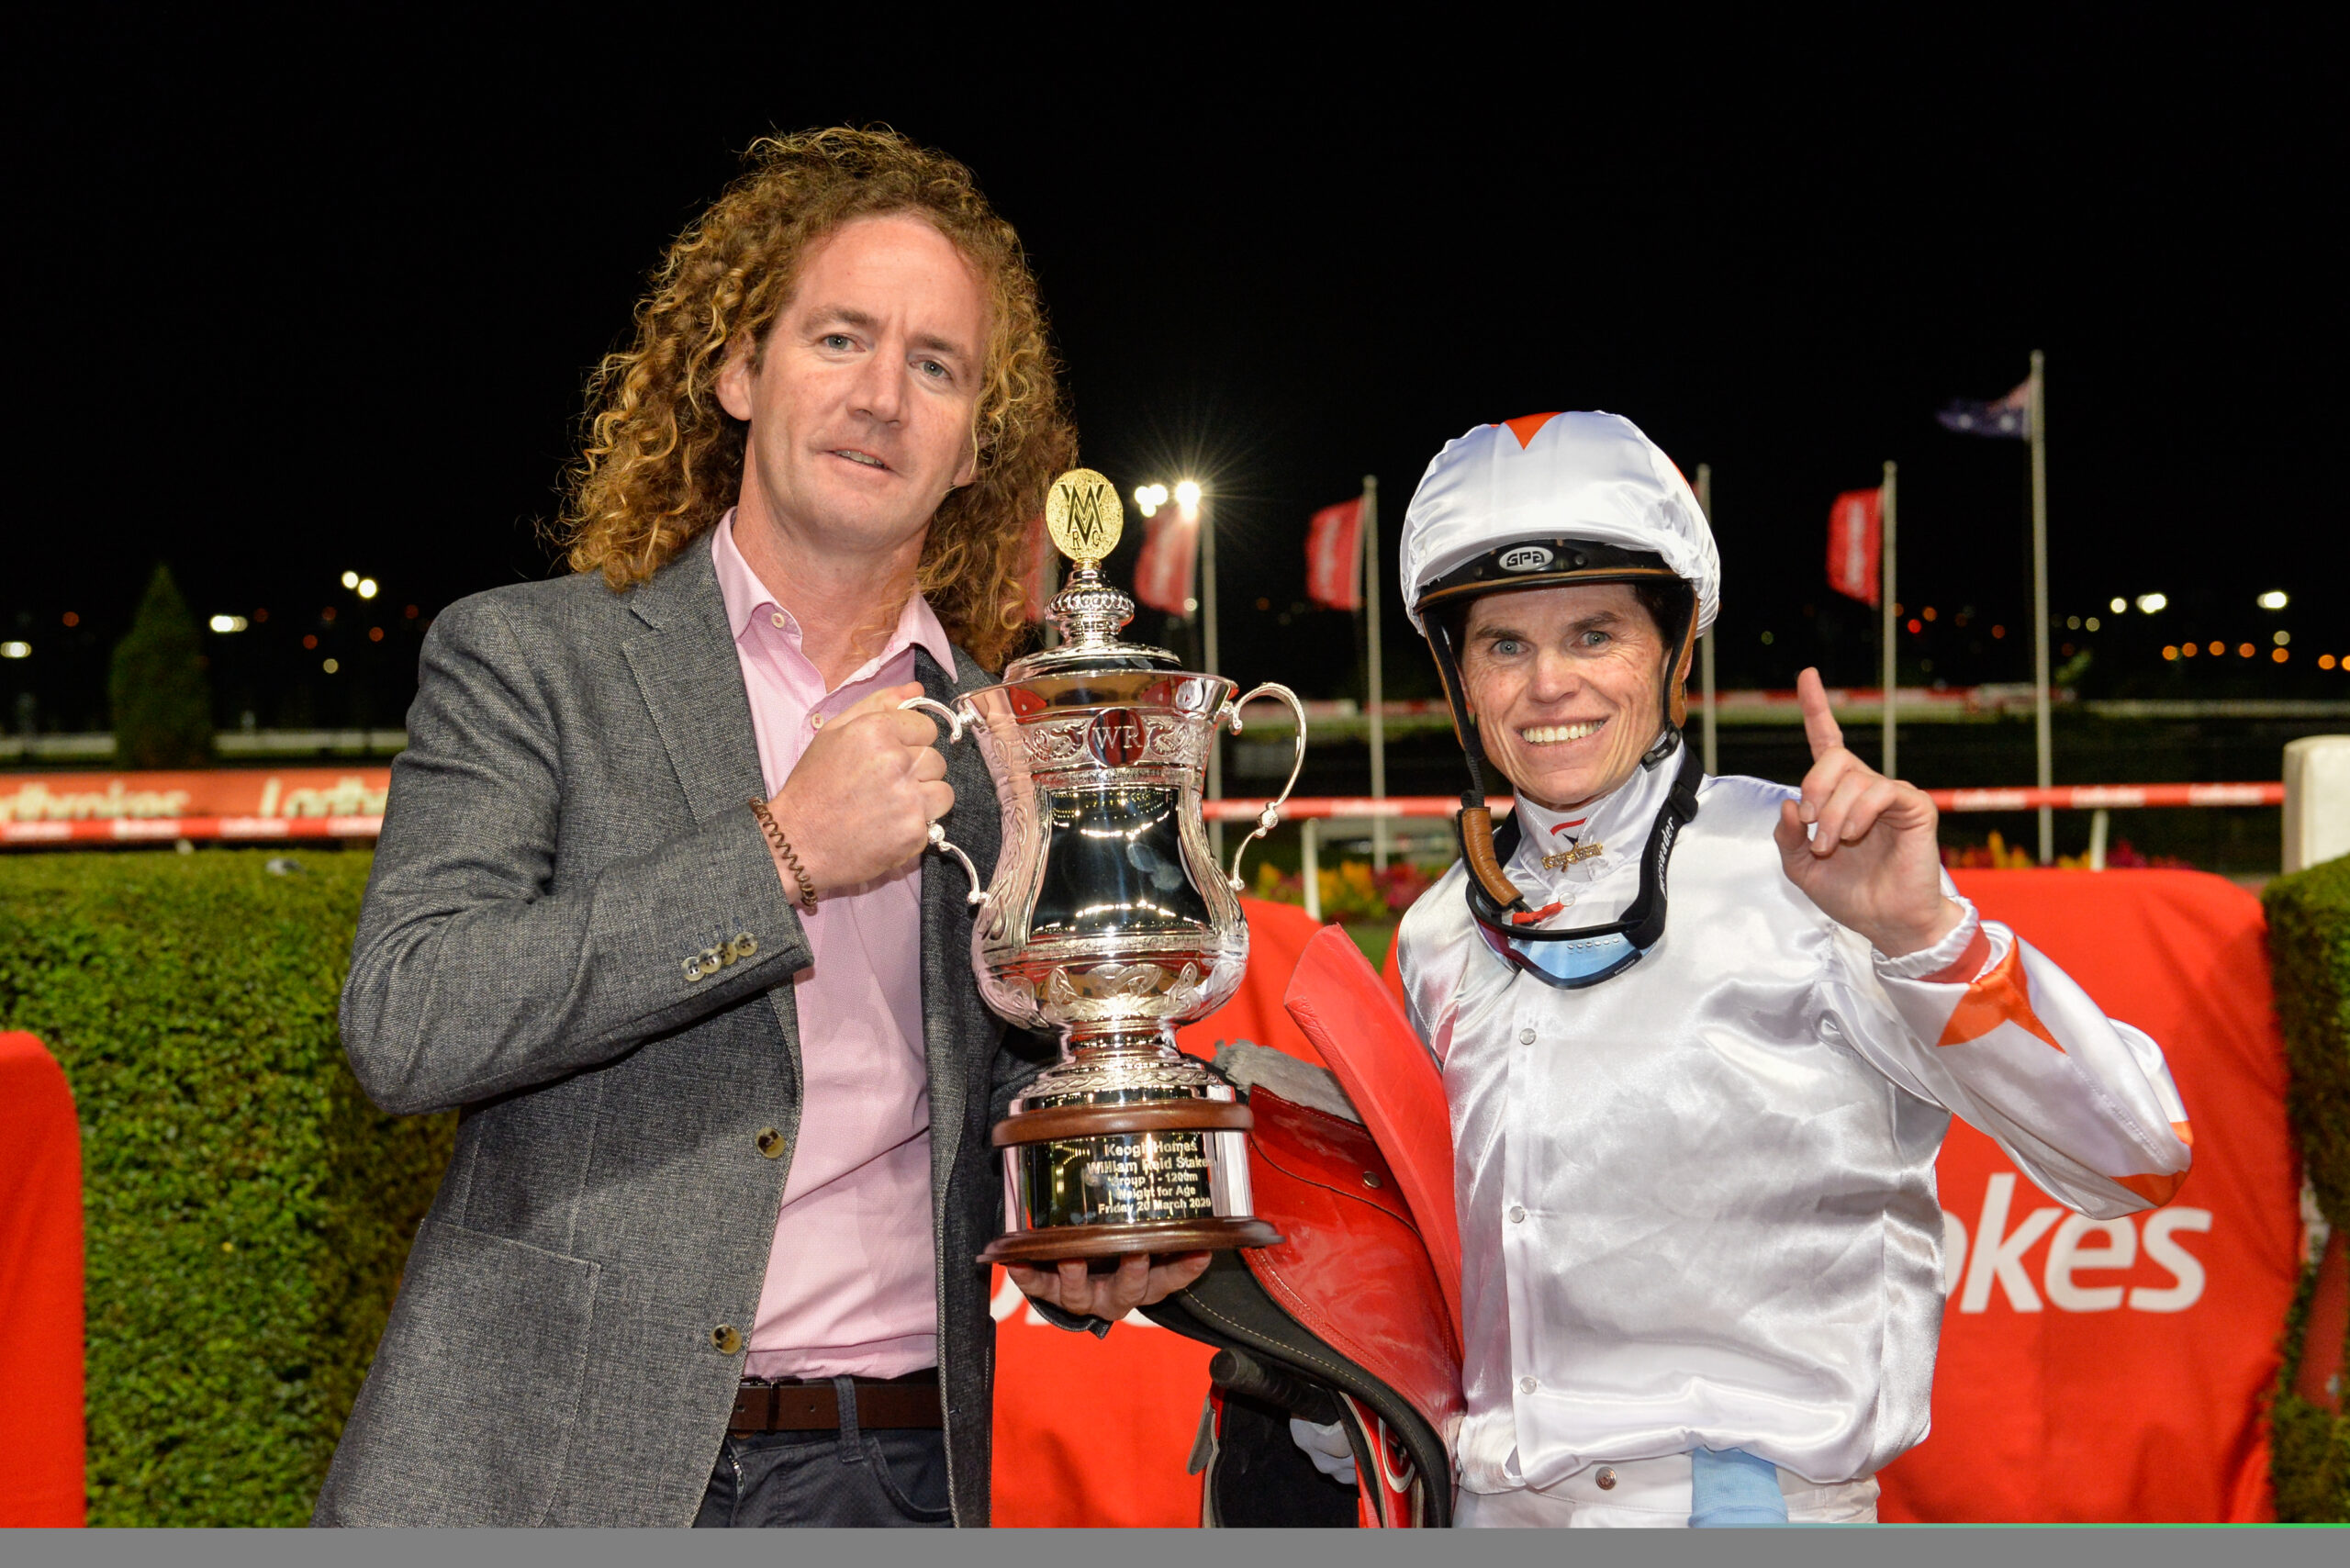 Presentation to Ciaron Maher , co-trainer of Loving Gaby and jockey Craig Williams after winning the Keogh Homes William Reid Stakes ,at Moonee Valley Racecourse on March 20, 2020 in Moonee Ponds, Australia. (George Salpigtidis/Racing Photos)